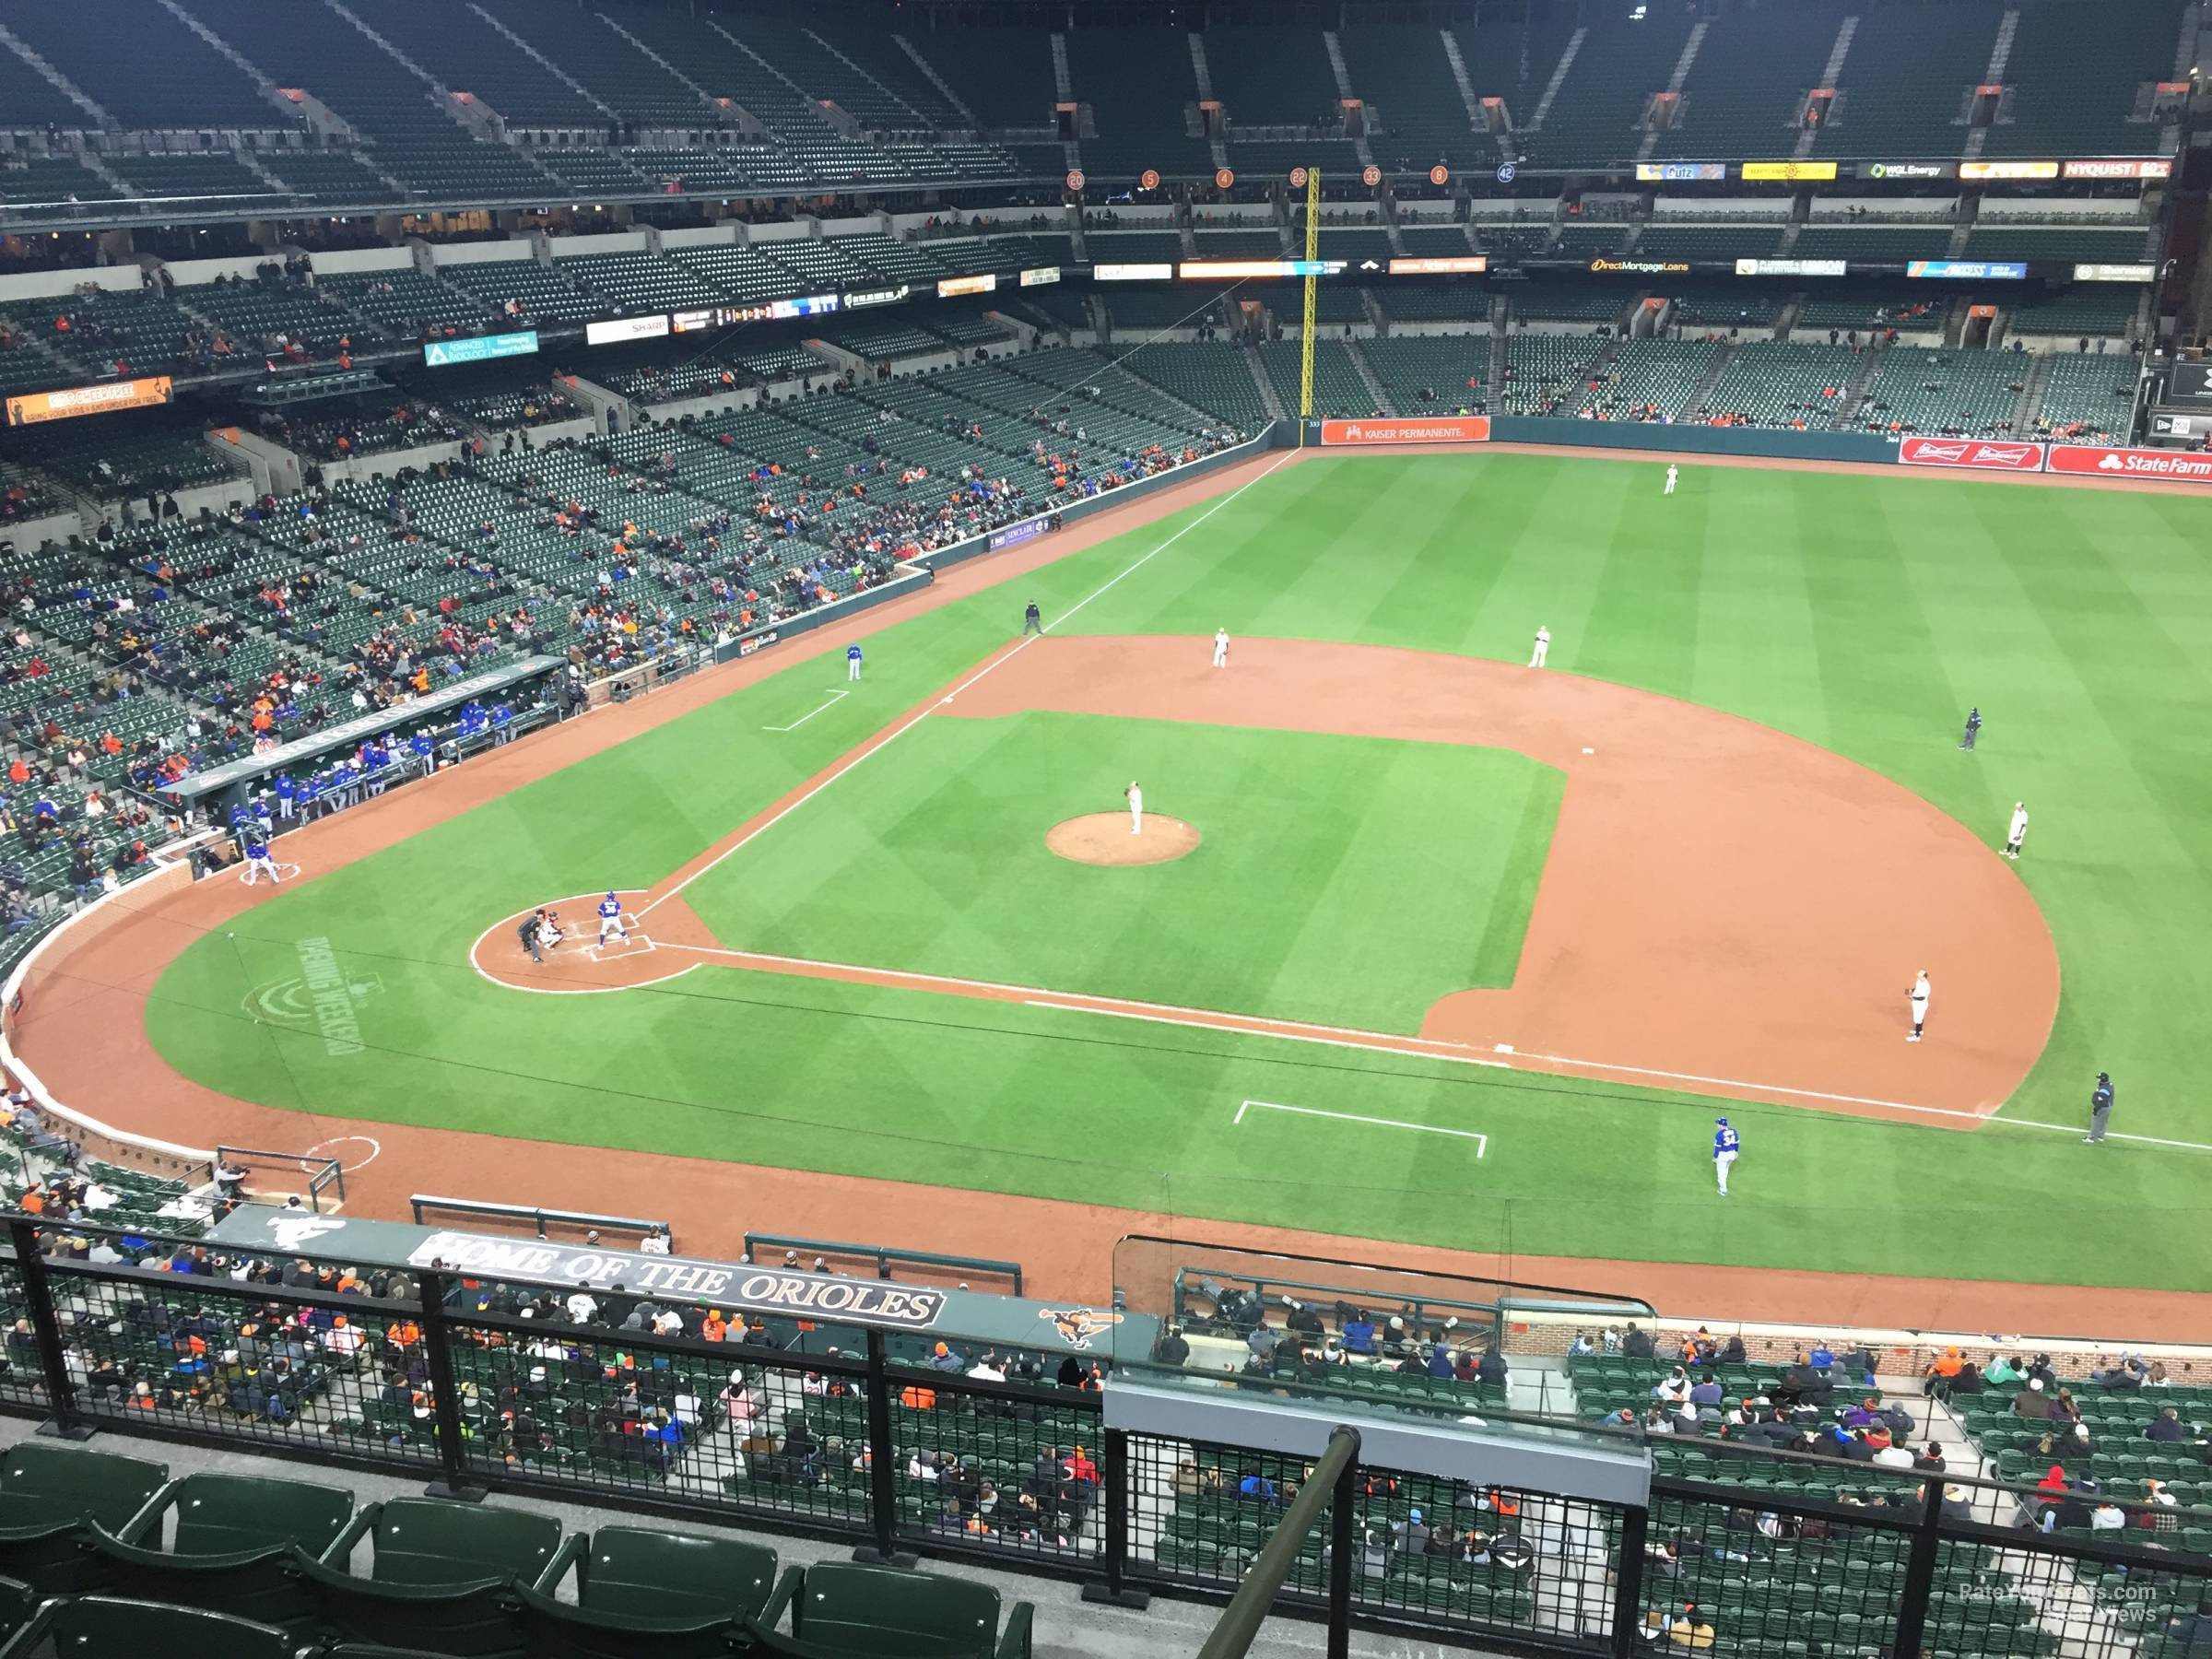 section 320, row 3 seat view  - oriole park